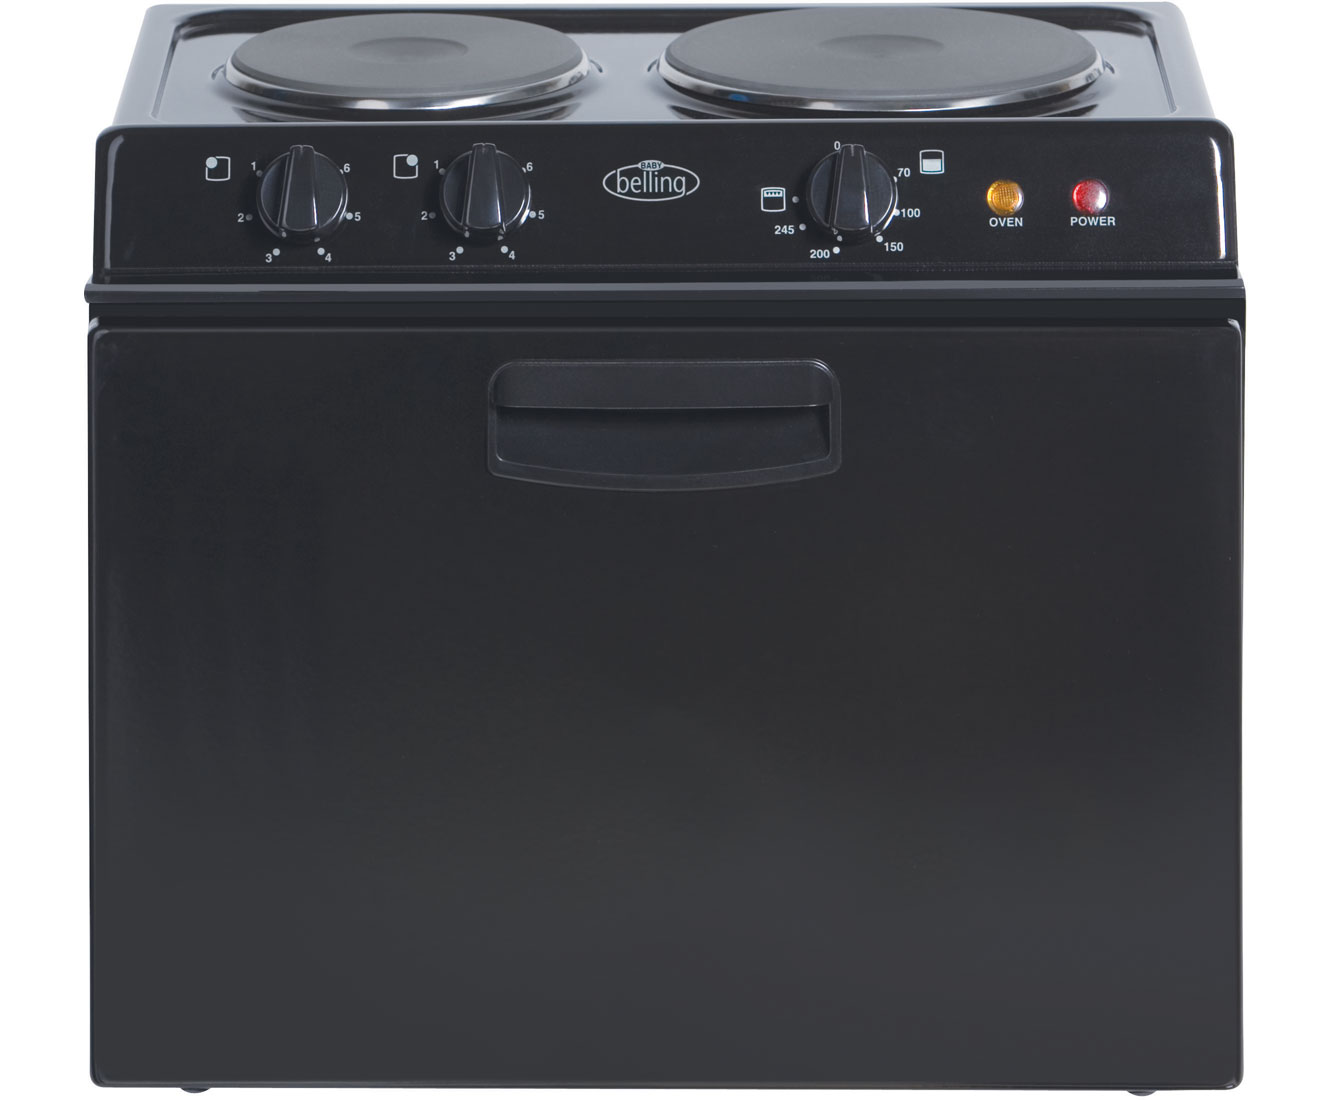 Belling BABY121R Free Standing Cooker in Black